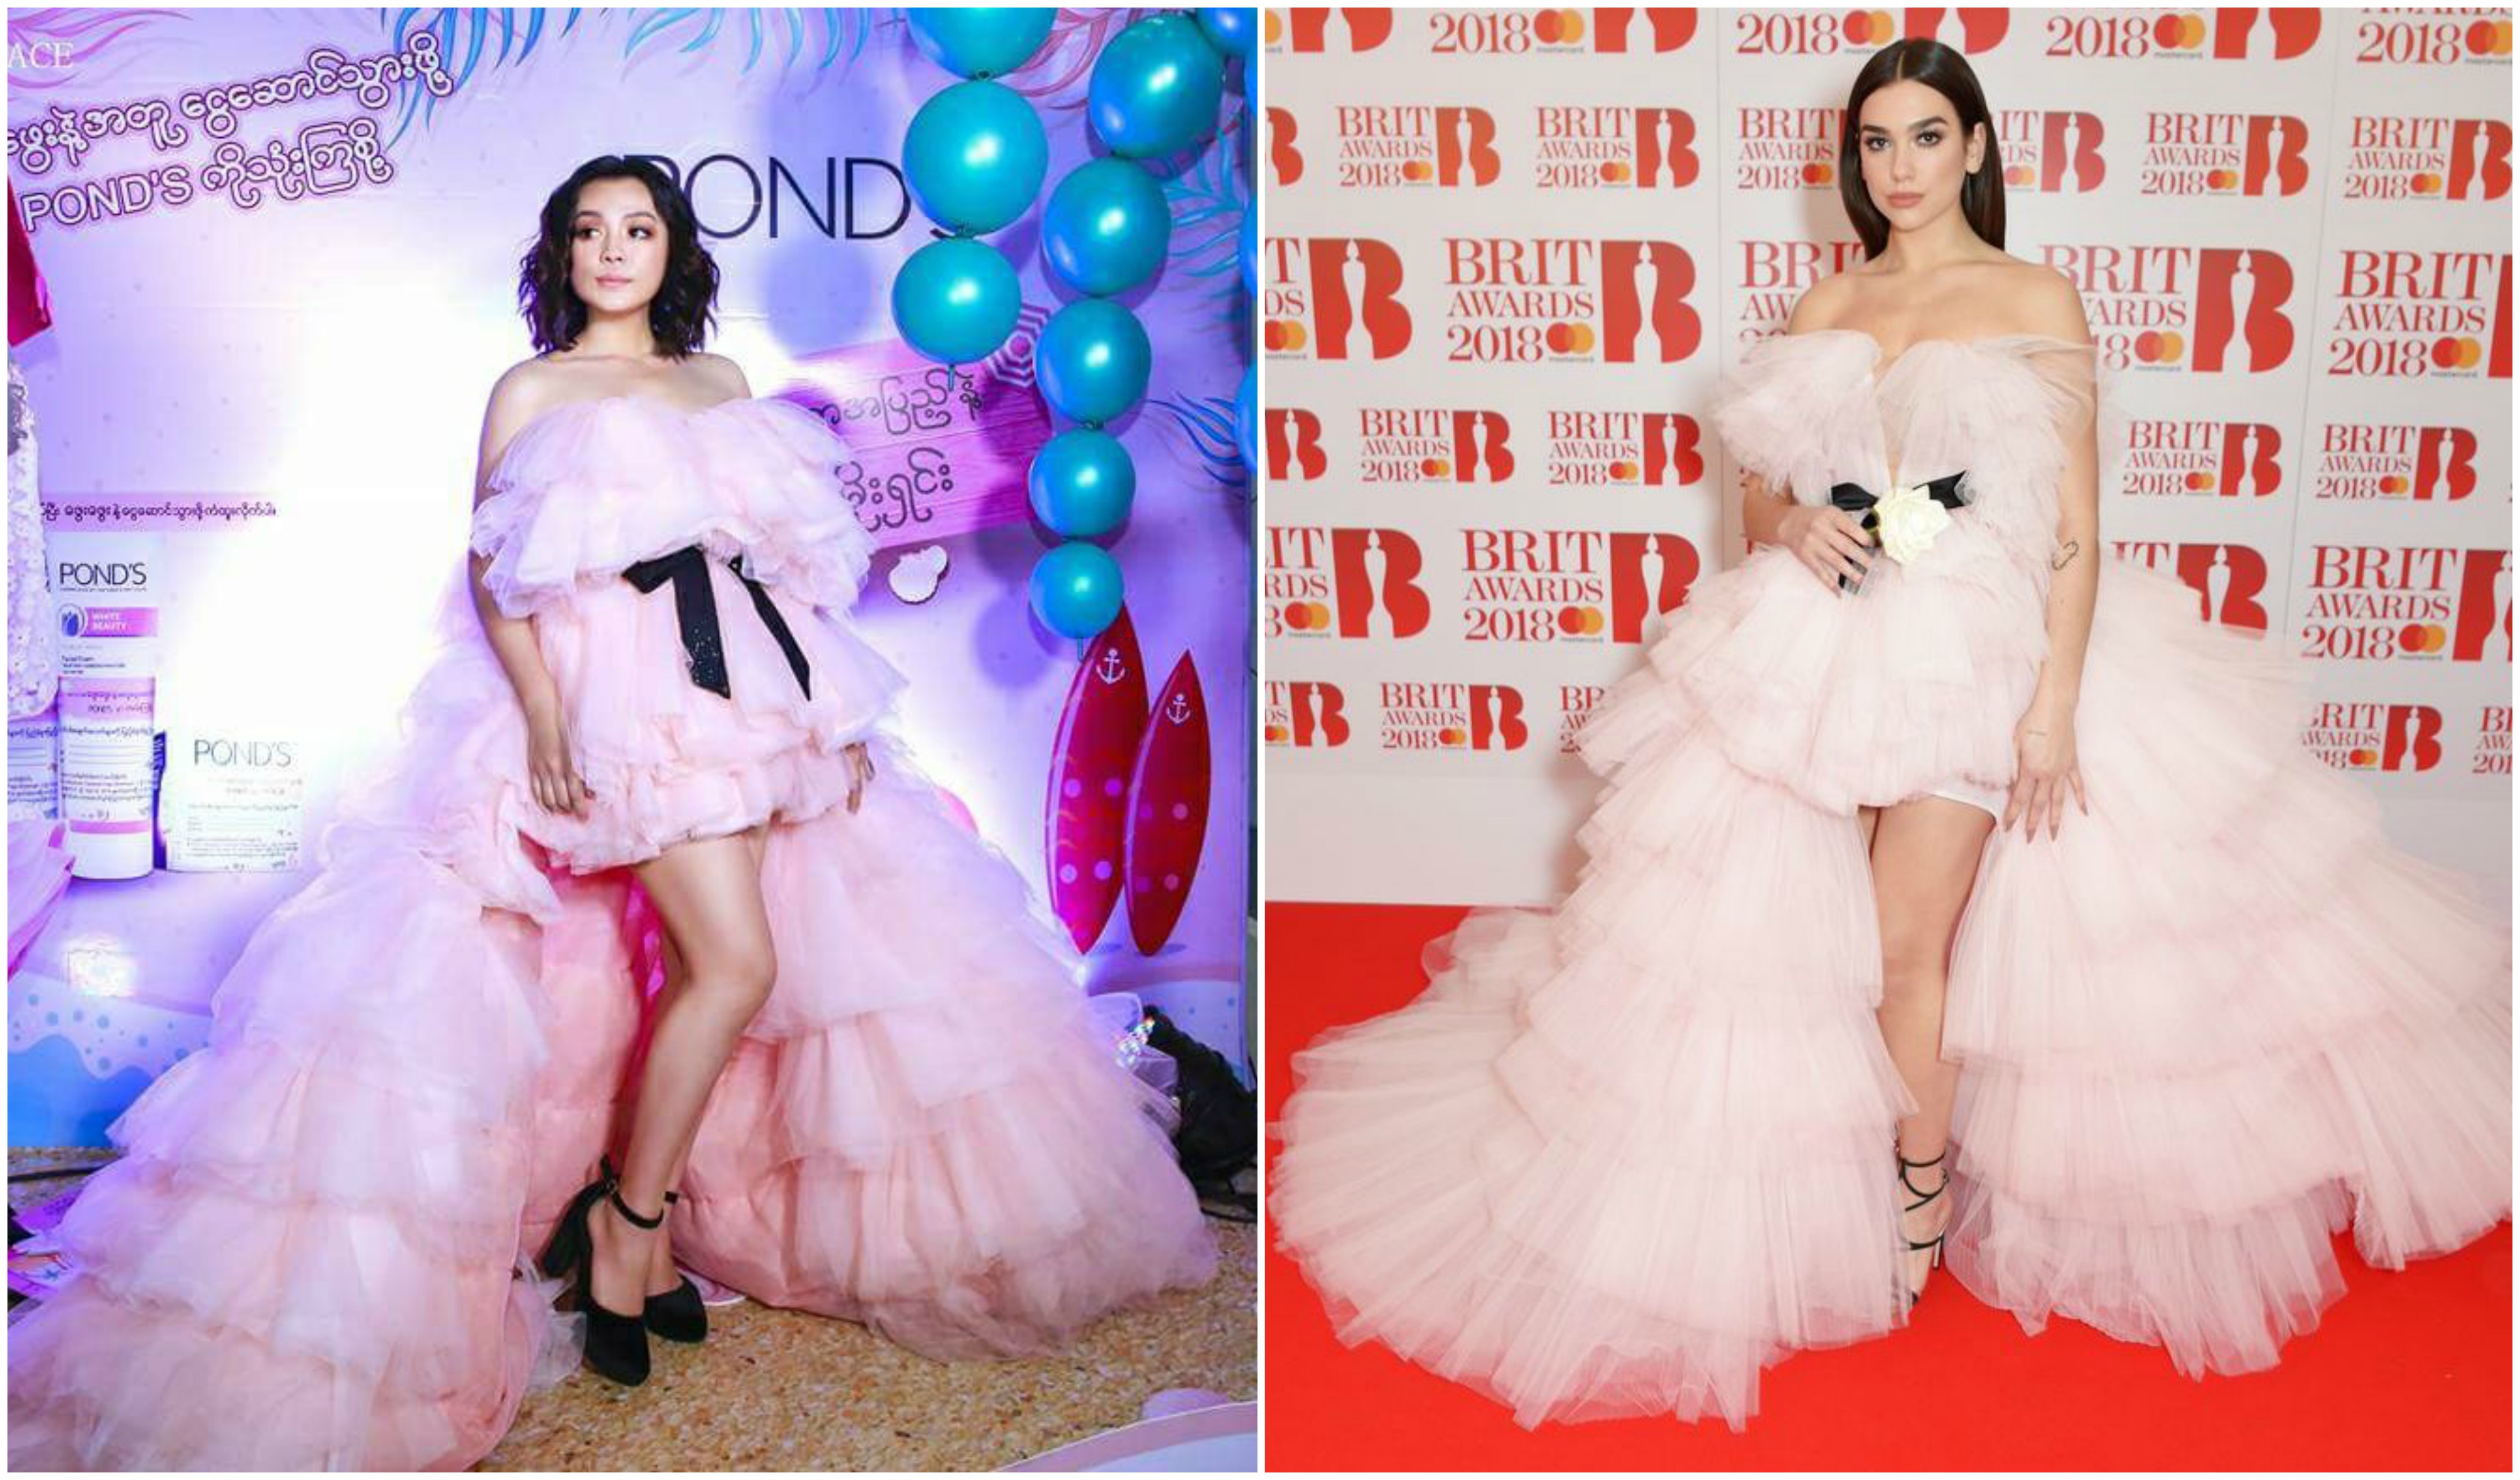 (L) Myanmar actress Phway Phway at the POND’S Summer Promotional Event in Yangon on March 1, 2018. (R) British singer Dua Lipa at the 2018 Brit Awards in London on Feb. 21, 2018.